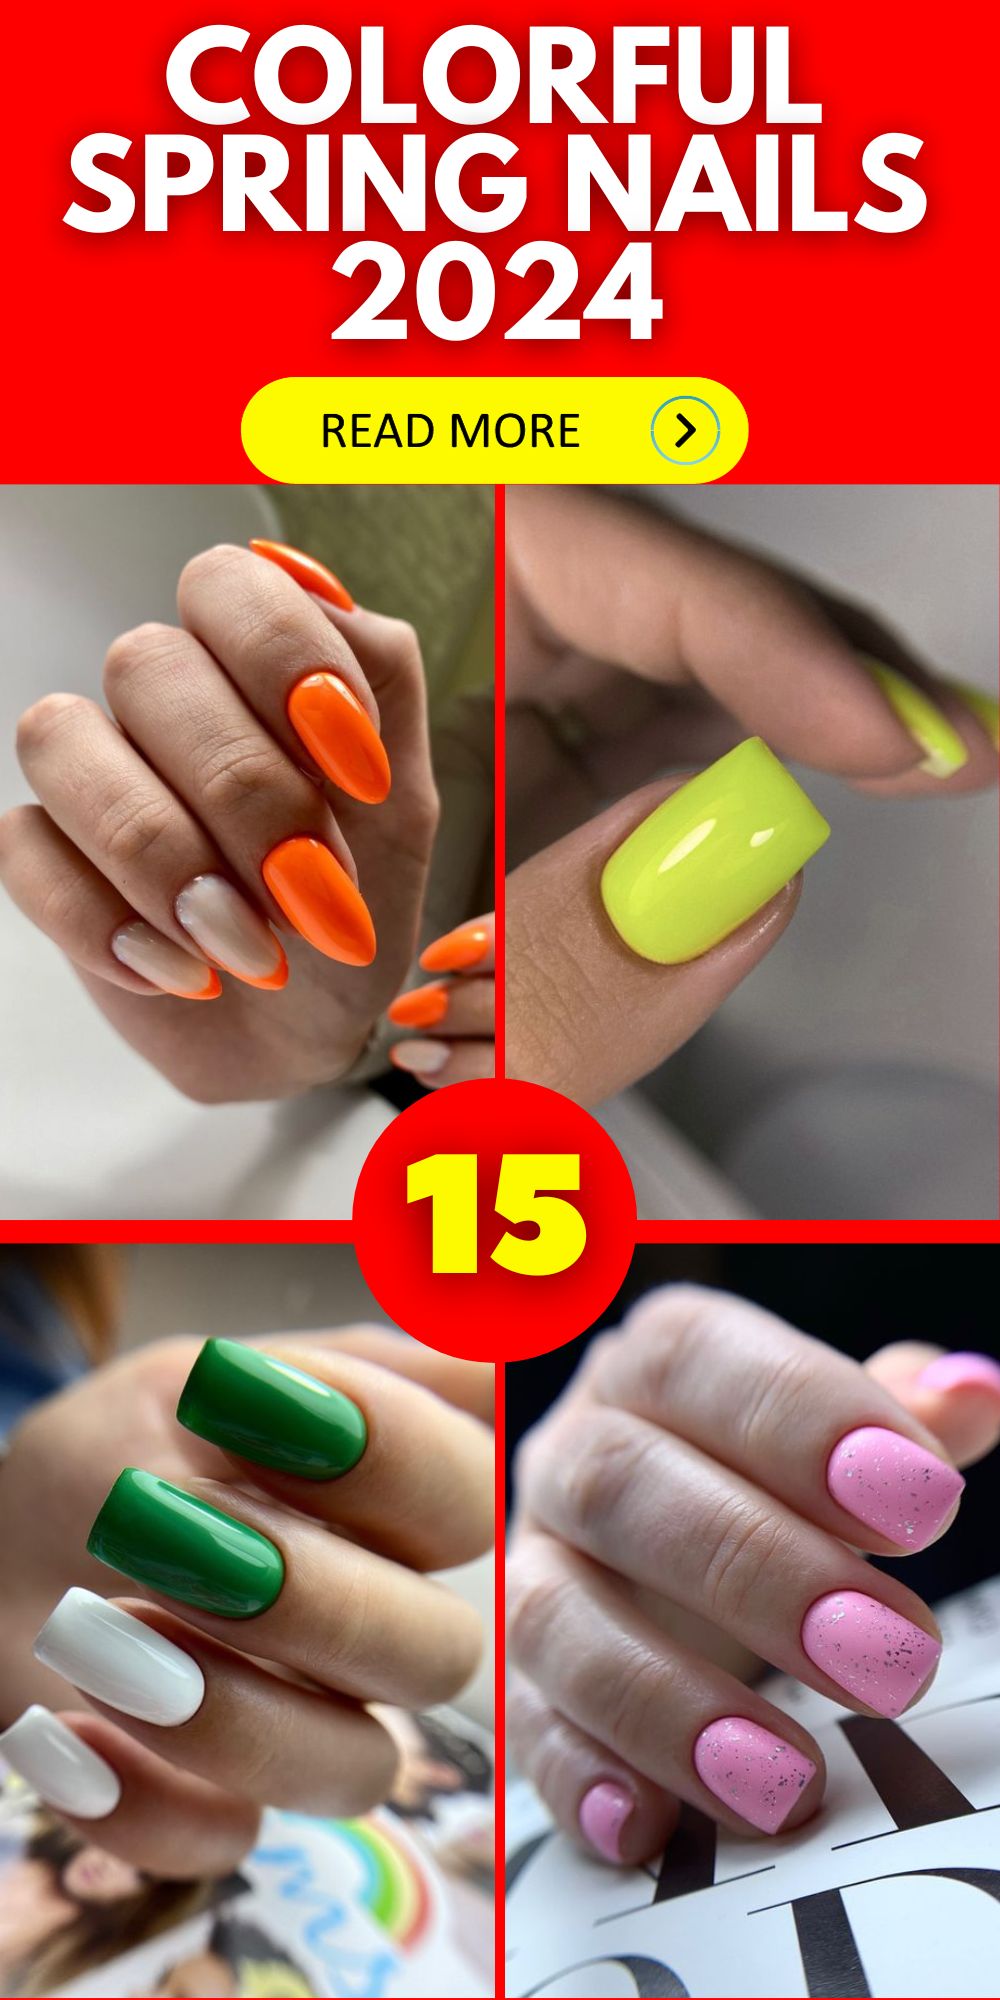 Colorful Spring Nails 2024: Embrace New Seasonal Acrylic Designs